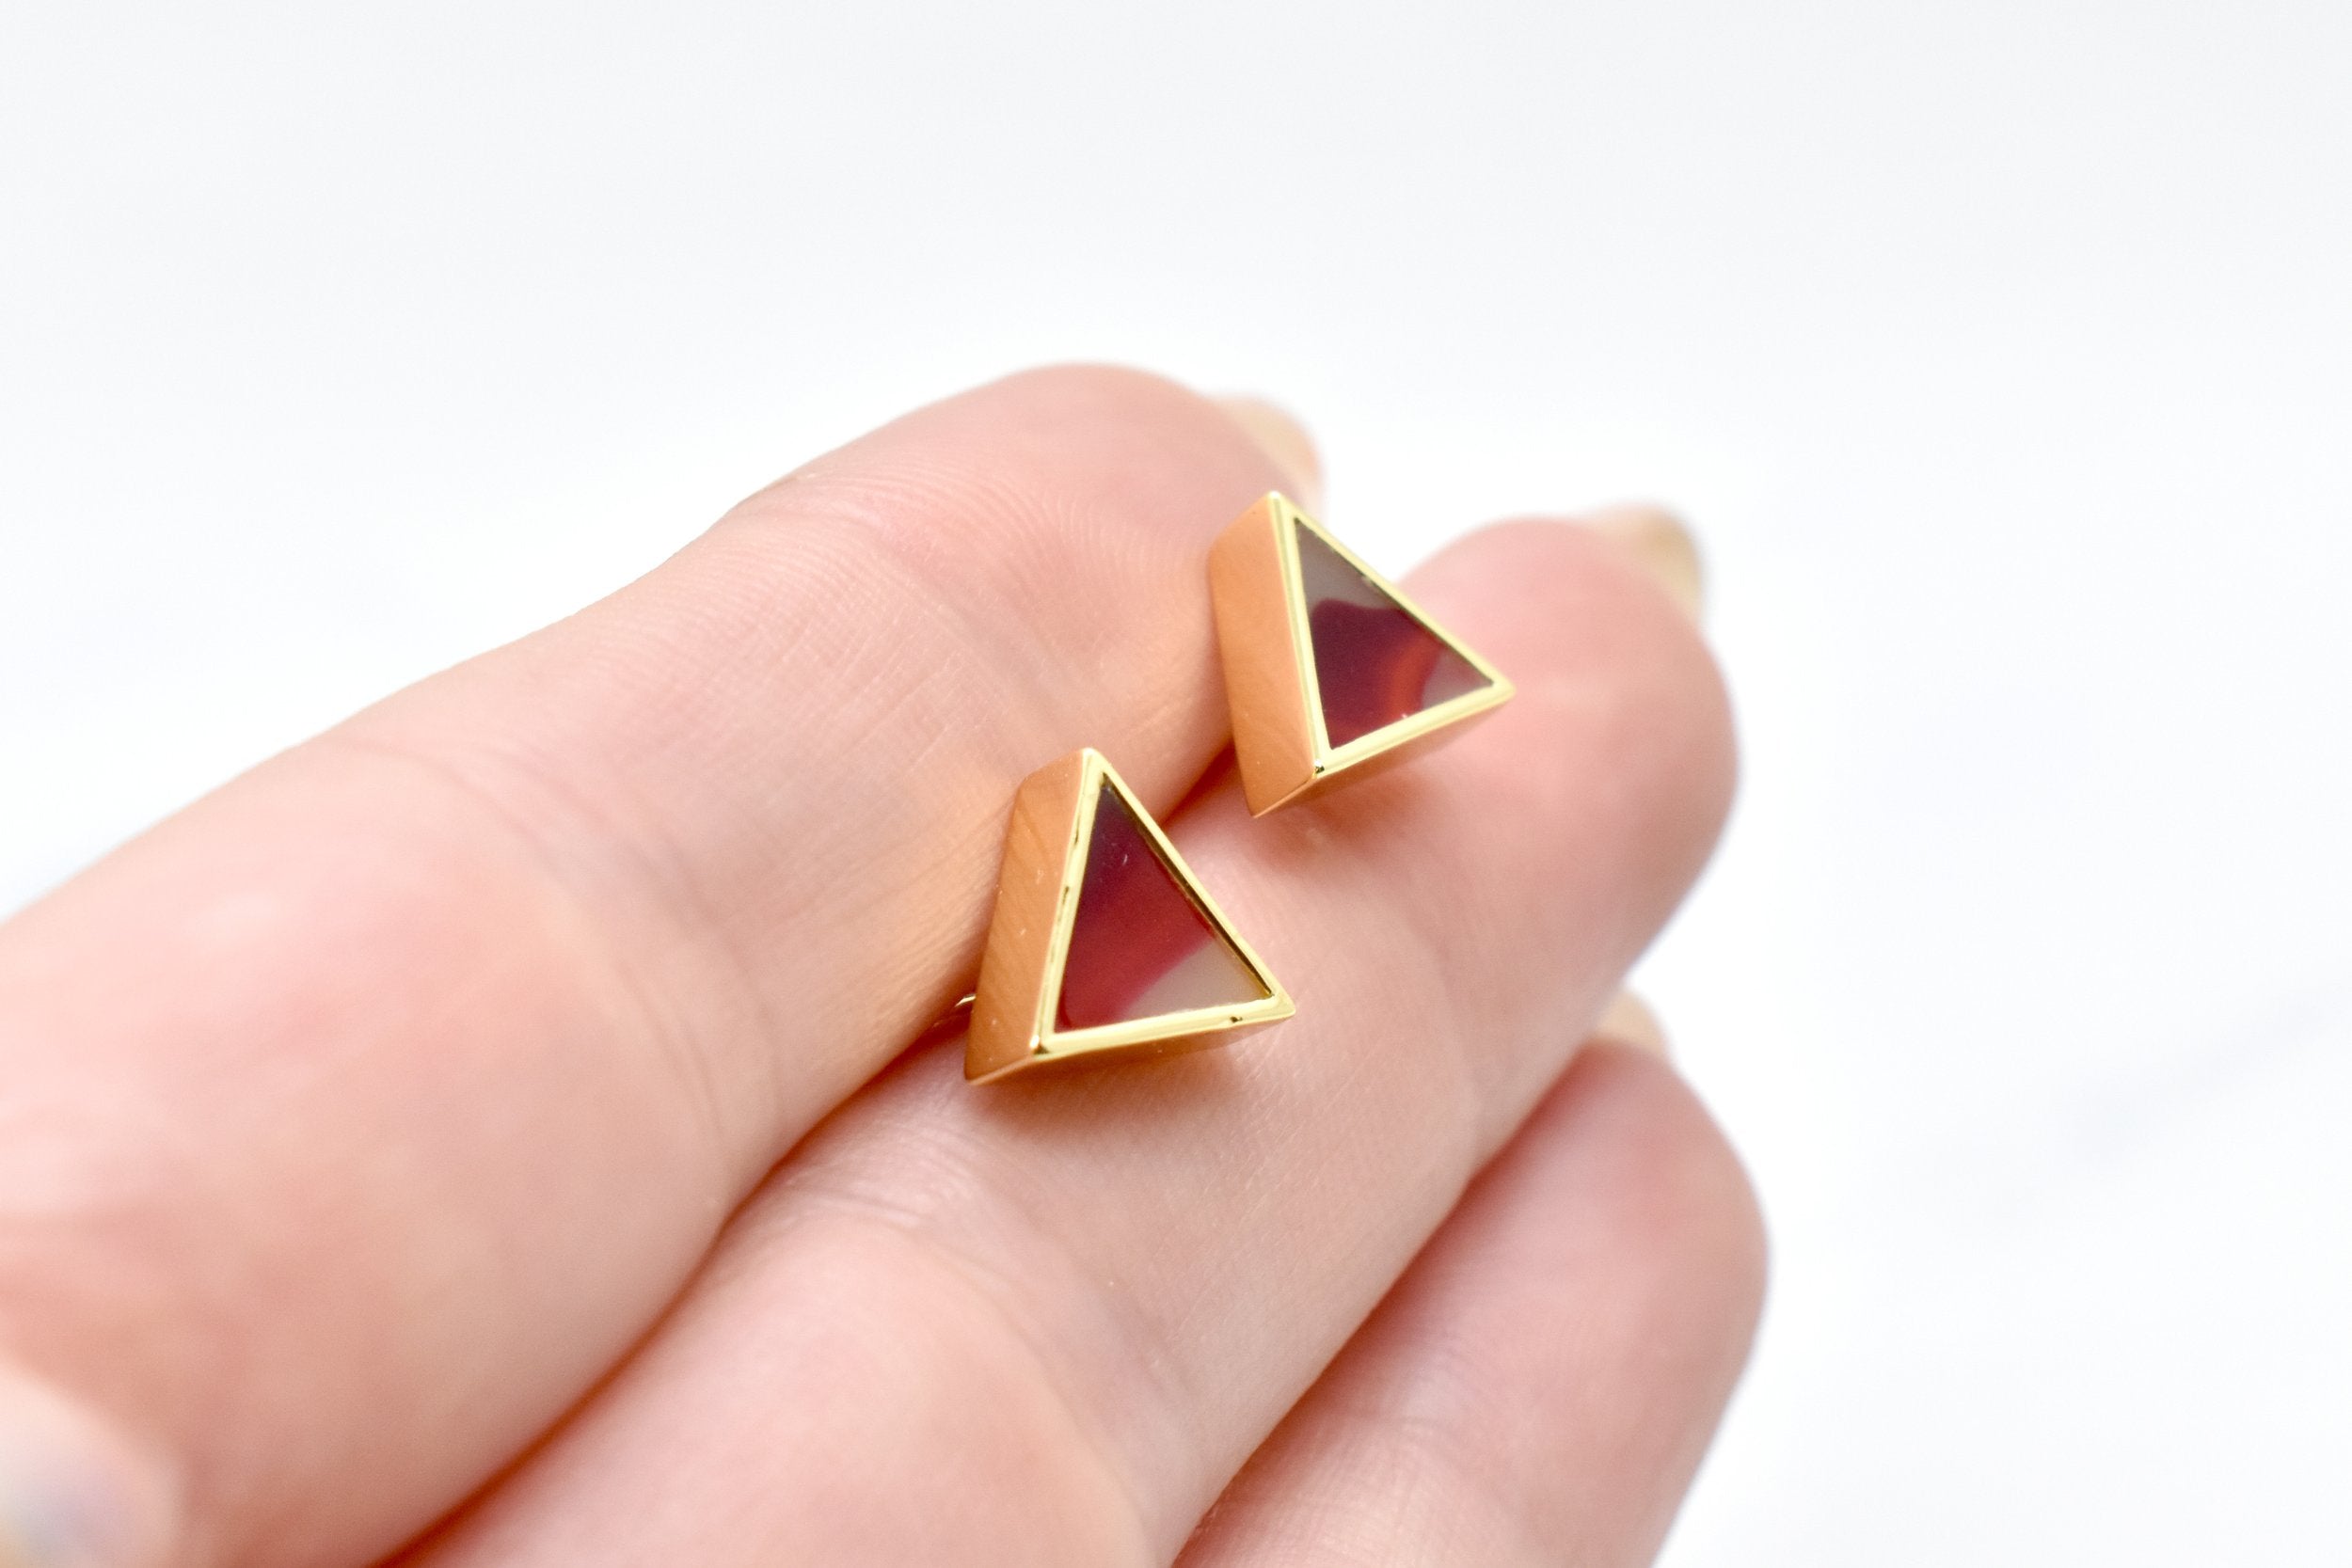 hands holding a pair of geometric triangle stud earrings in garnet red with gemstone texture clay, hand marbled to look like sapphire, a perfect gift for a July birthday